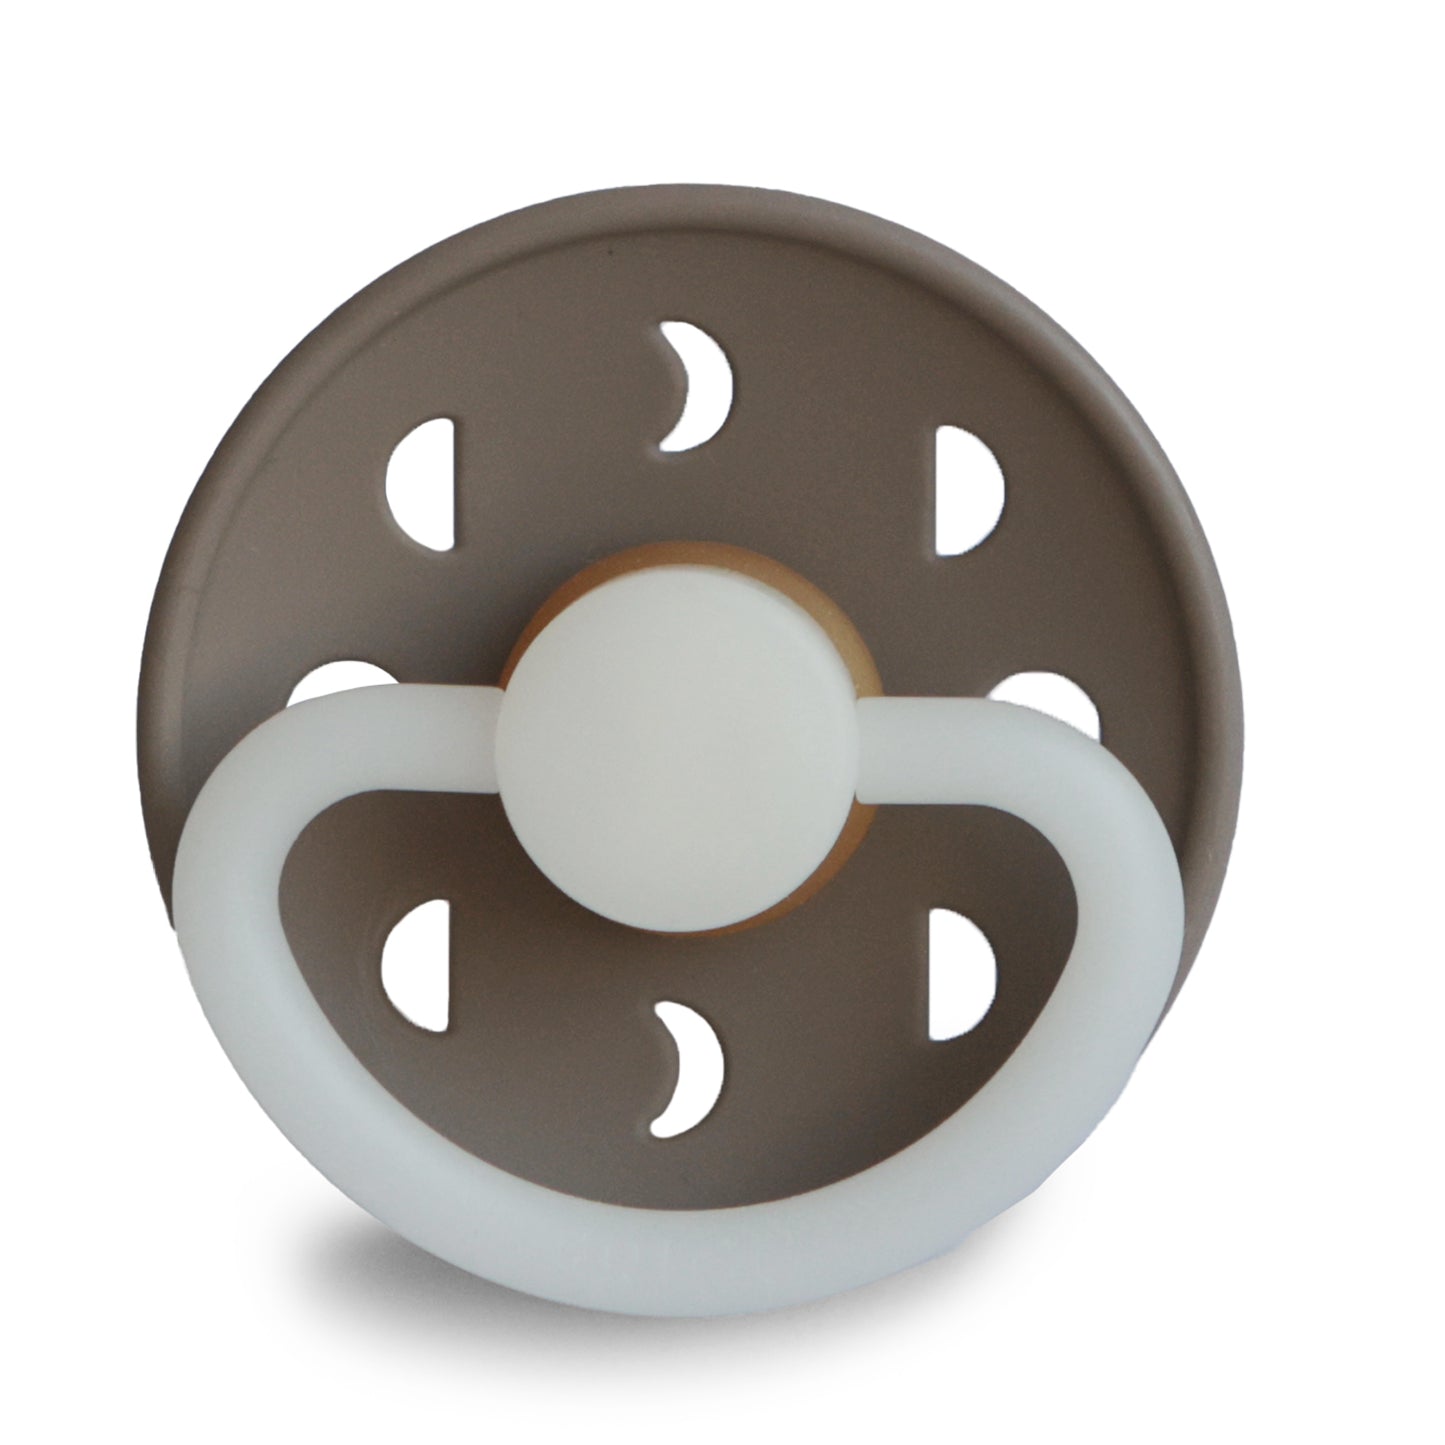 Frigg pacifier Silicone - FRIGG Moon Phase and Moon Phase Night - Size 1